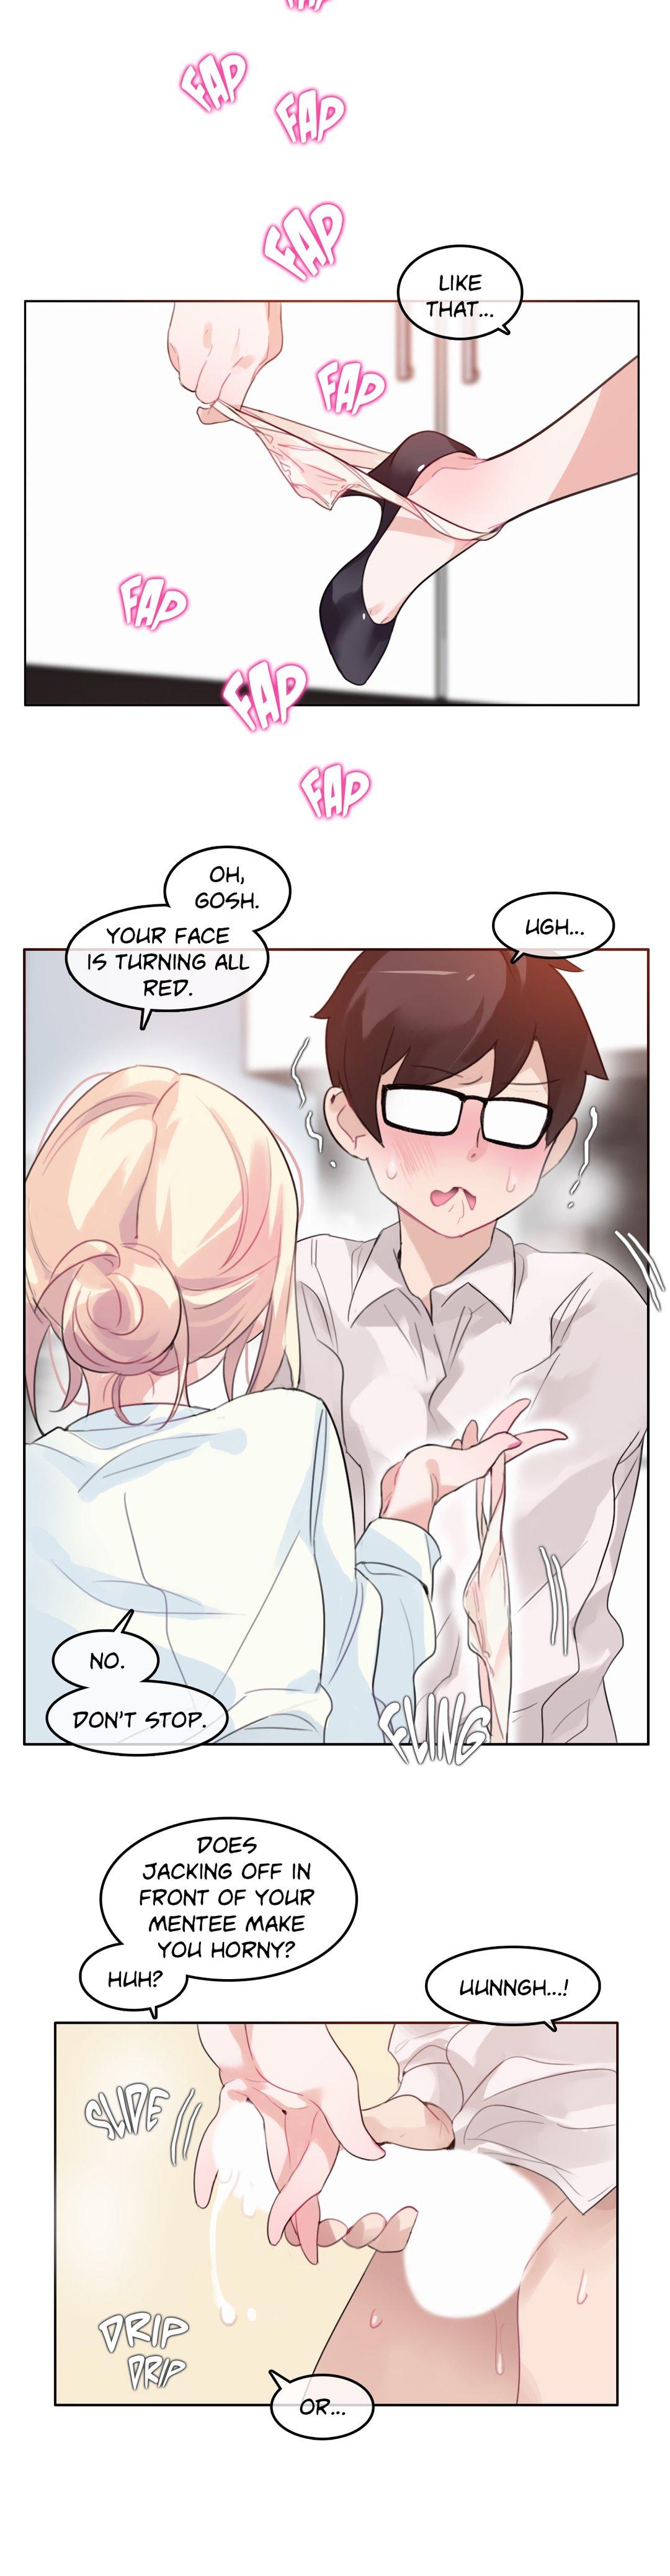 A Pervert's Daily Life Ch. 1-34 720